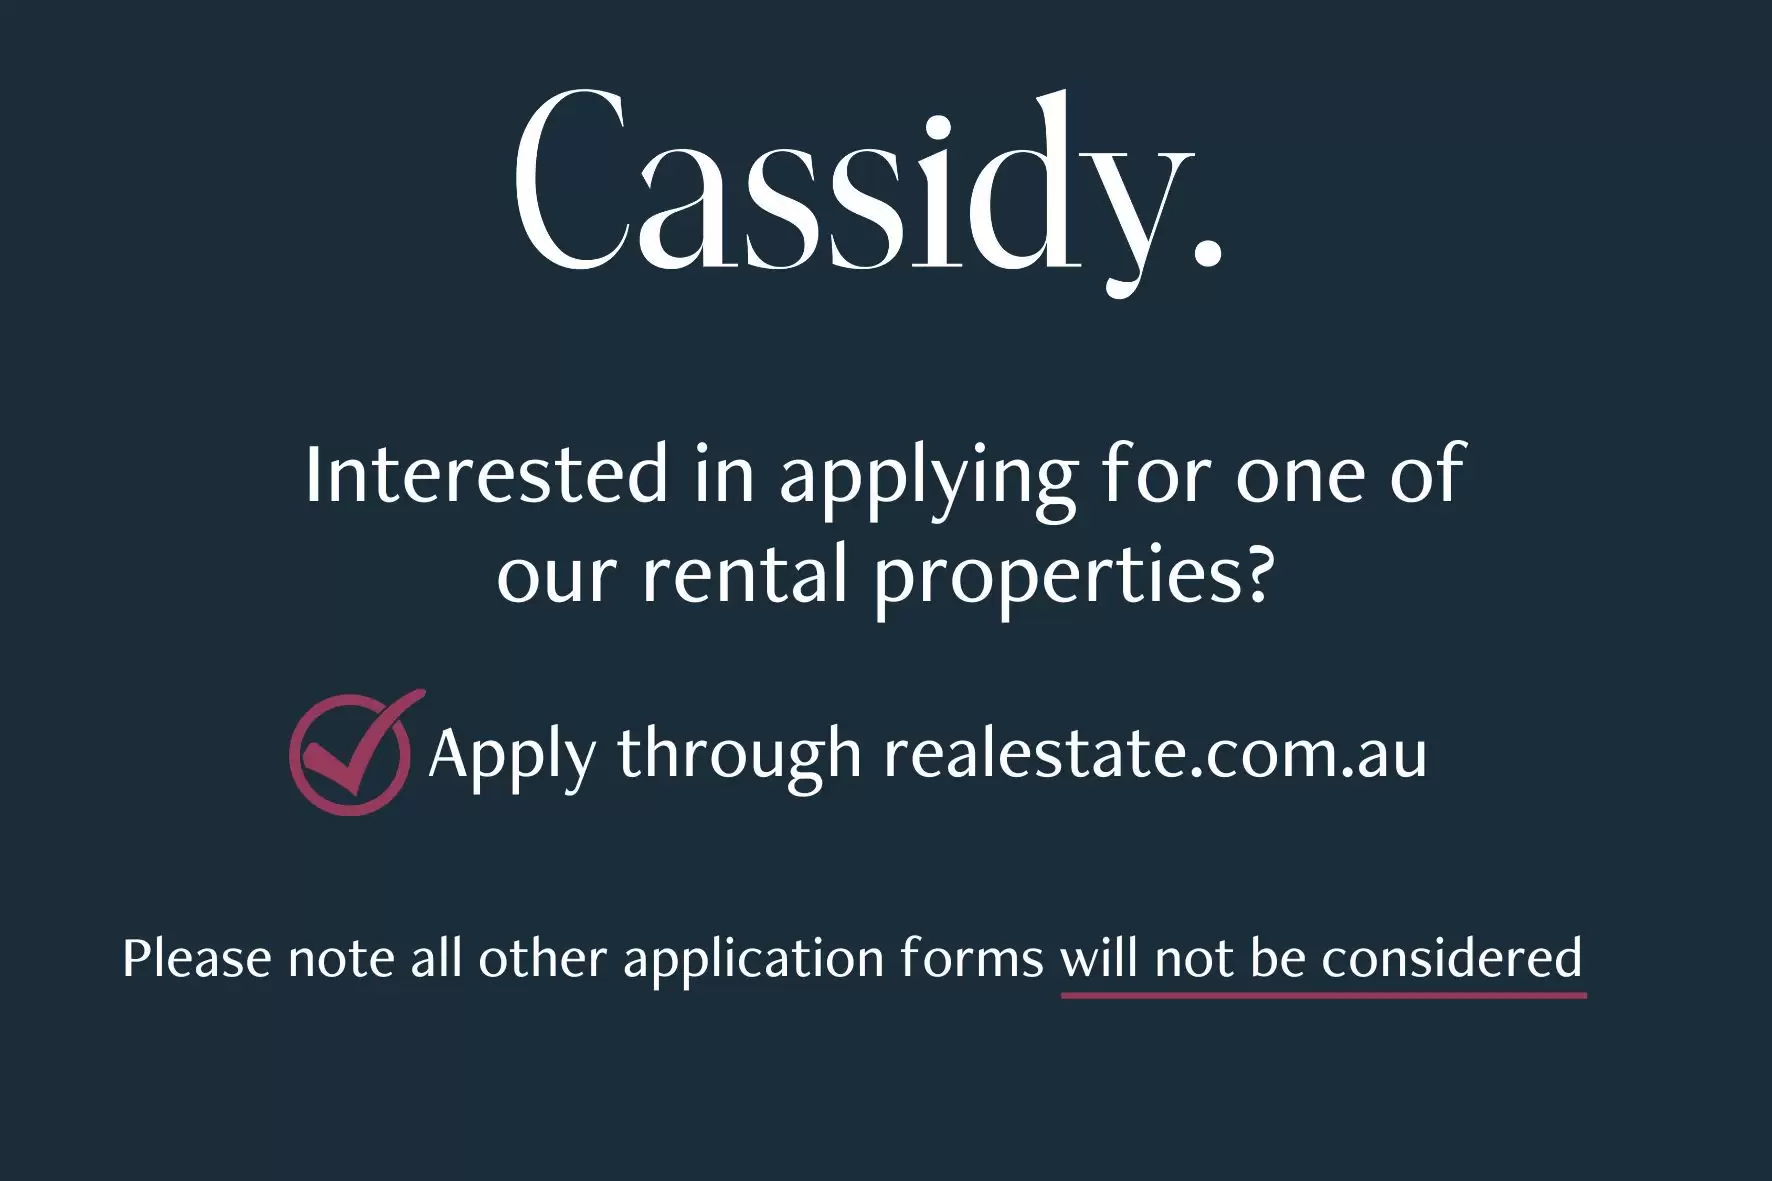 11/818 Victoria Road, Ryde For Lease by Cassidy Real Estate - image 1